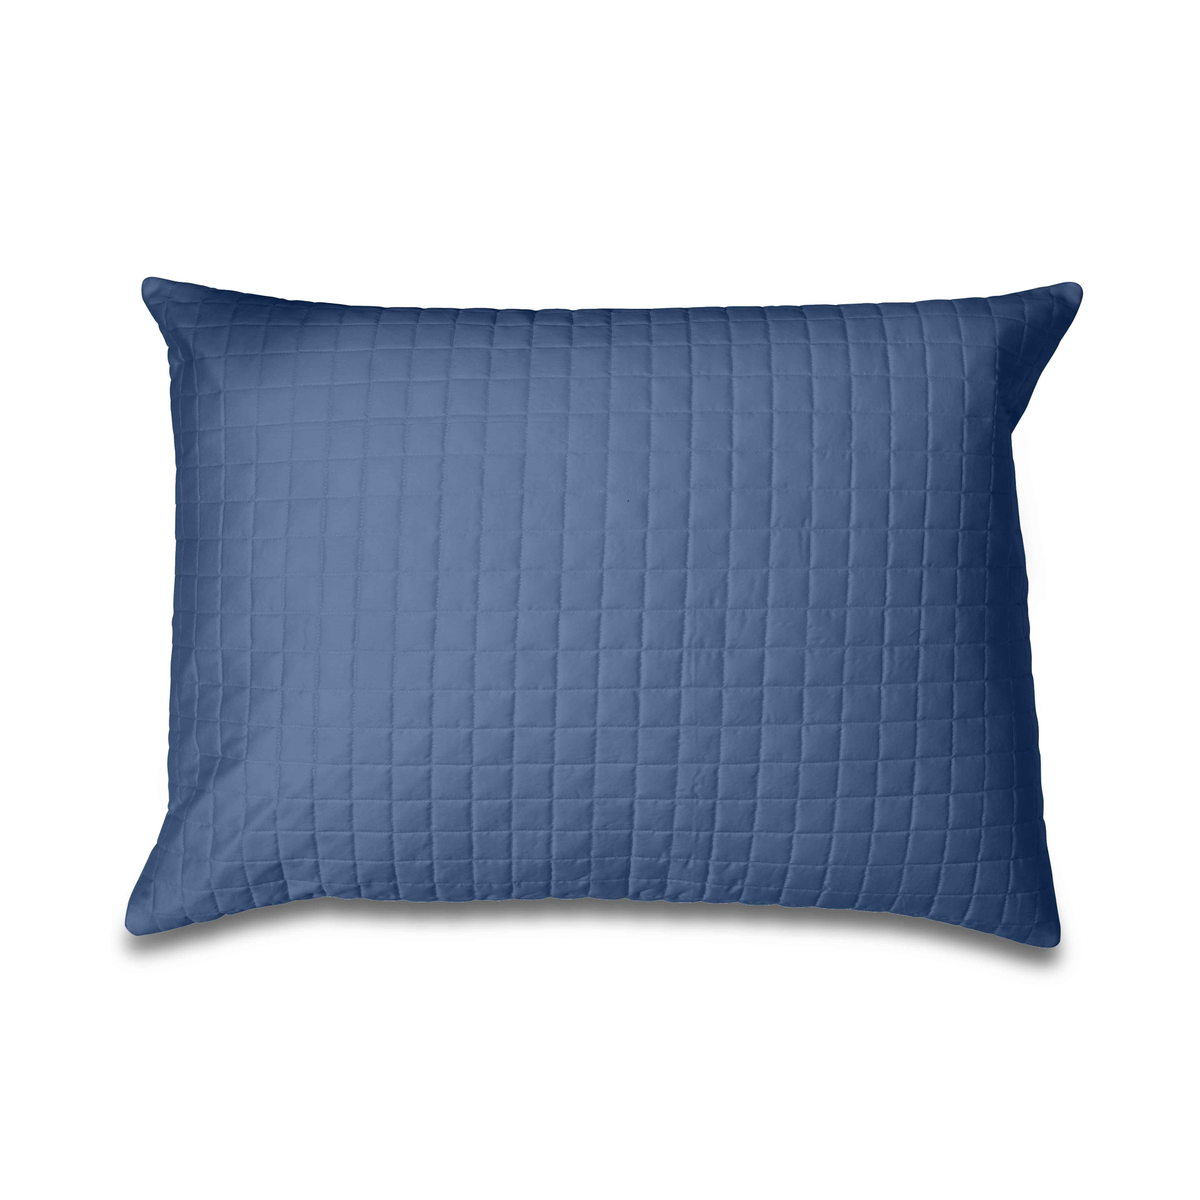 Quilted Standard Sham of Signoria Masaccio Bedding in Airforce Blue Color